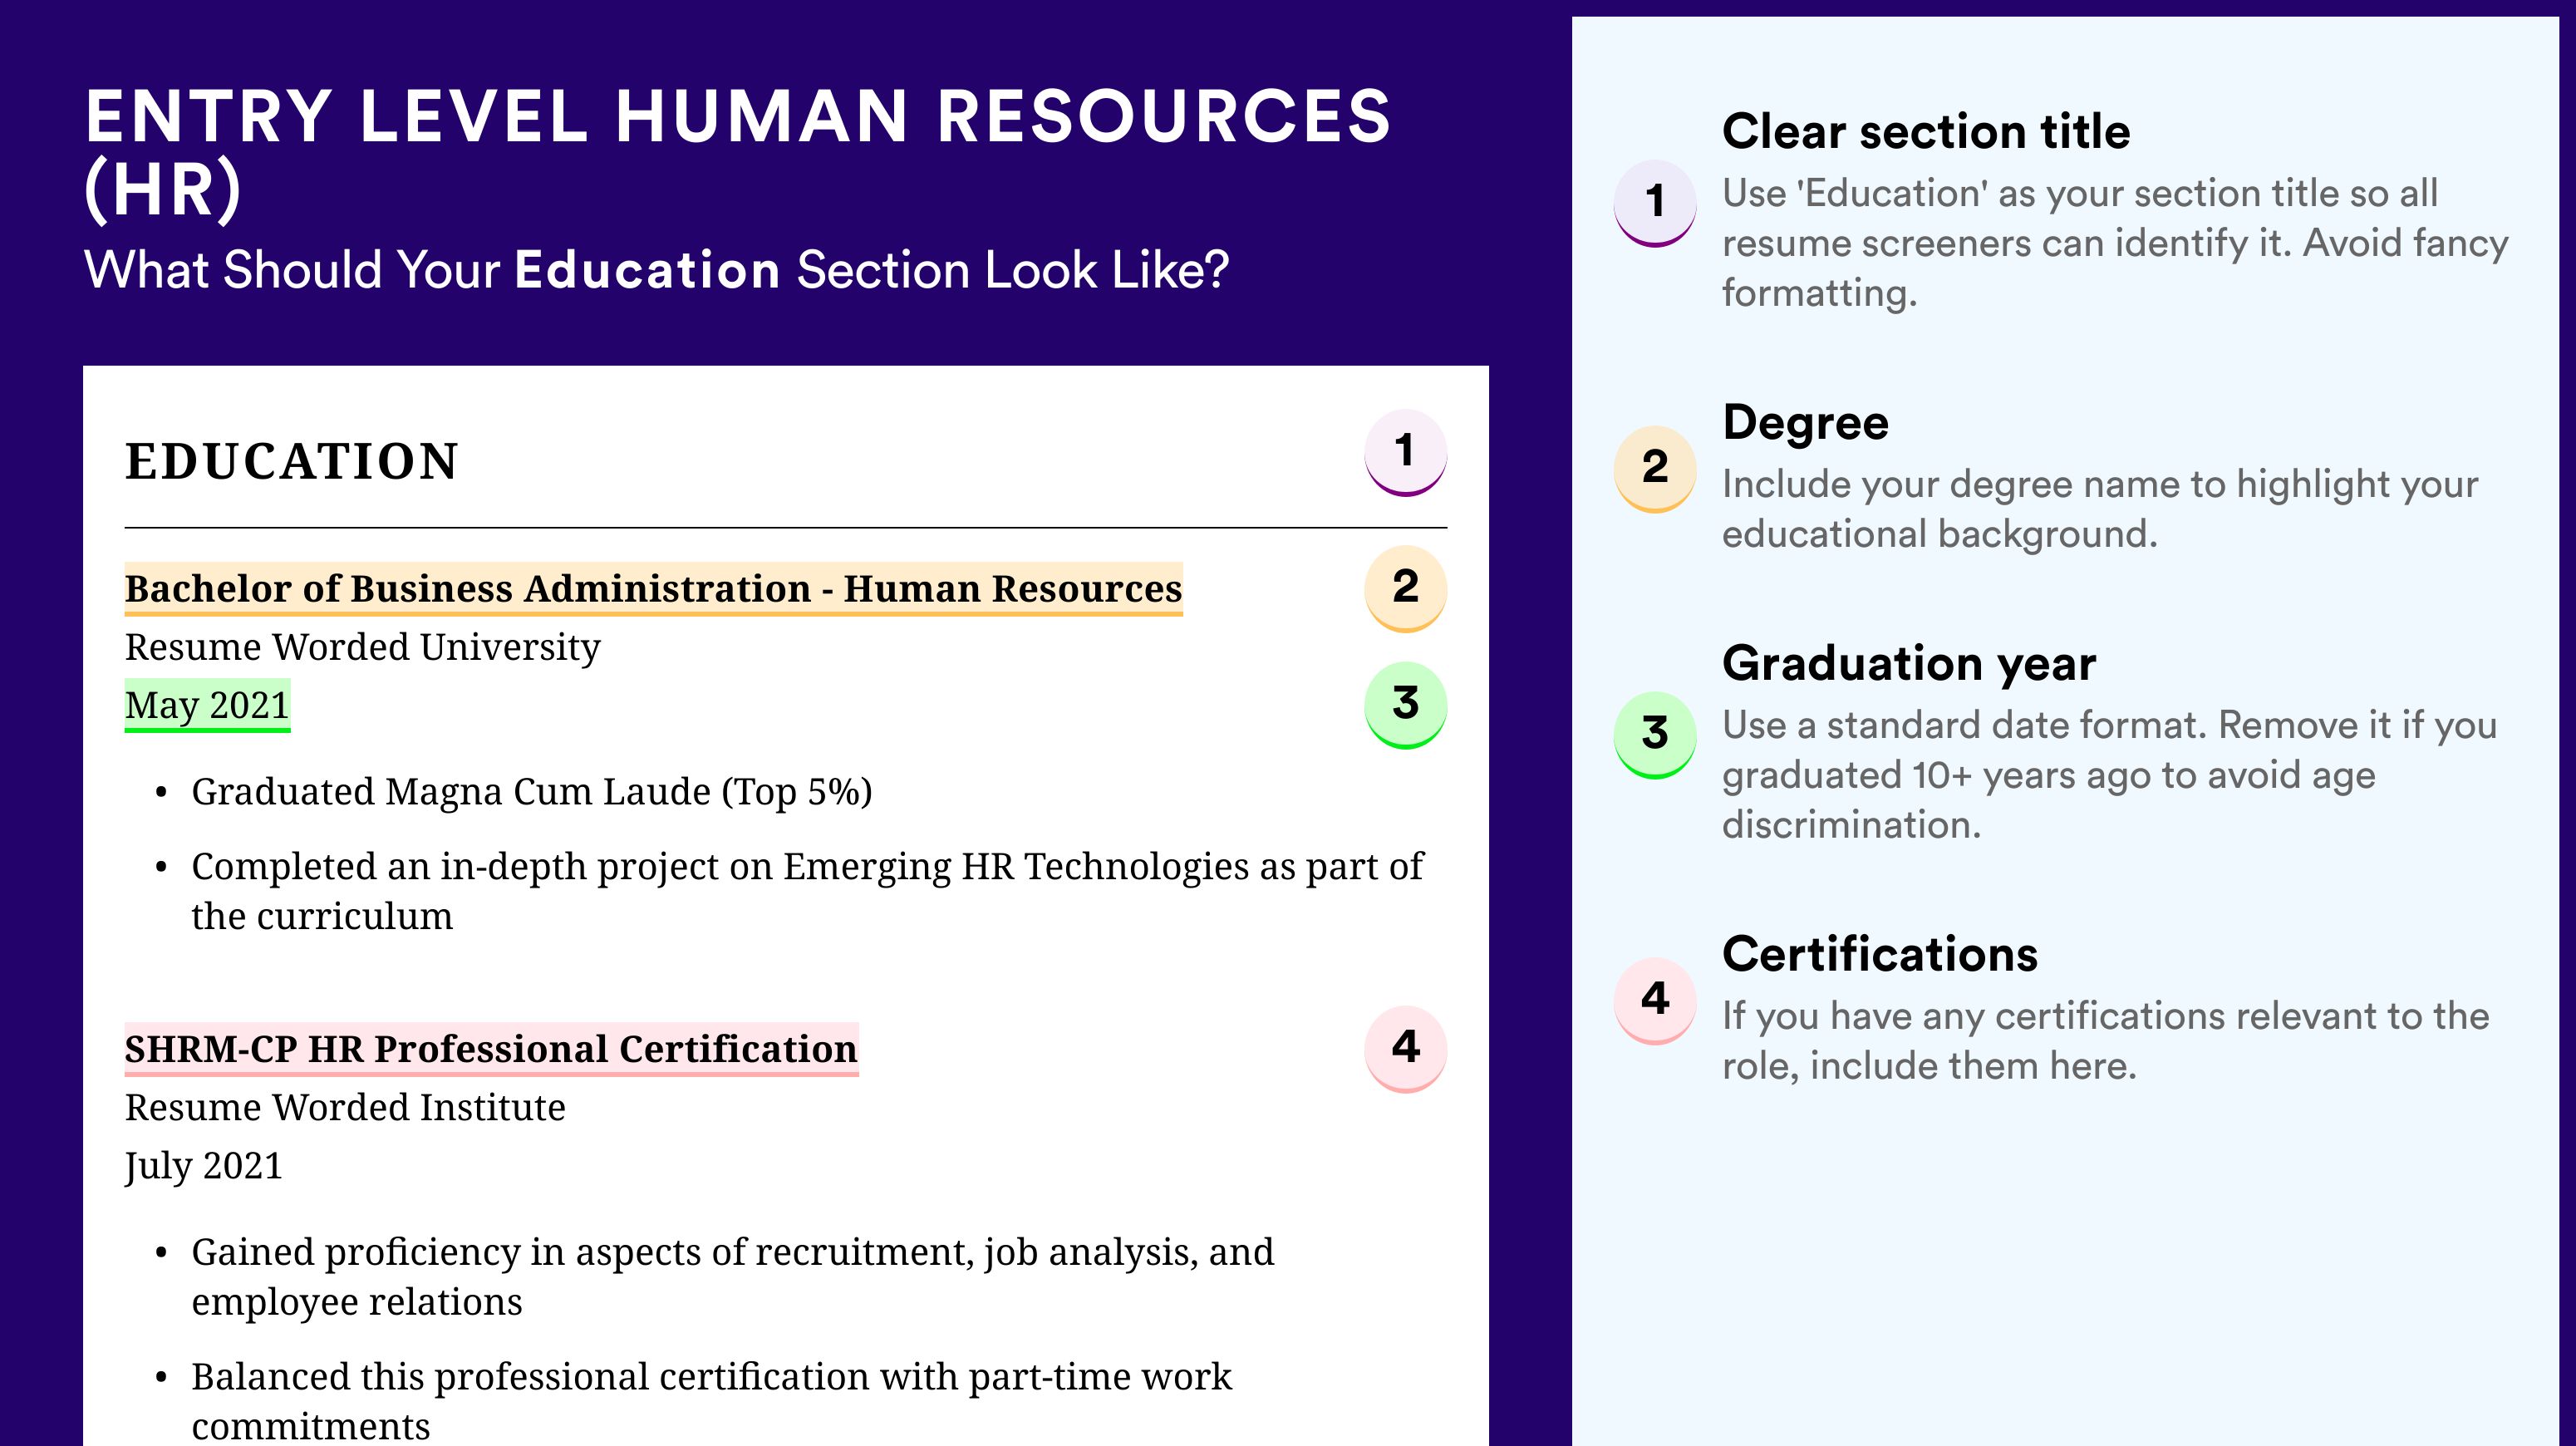 How To Write An Education Section - Entry Level Human Resources (HR) Roles